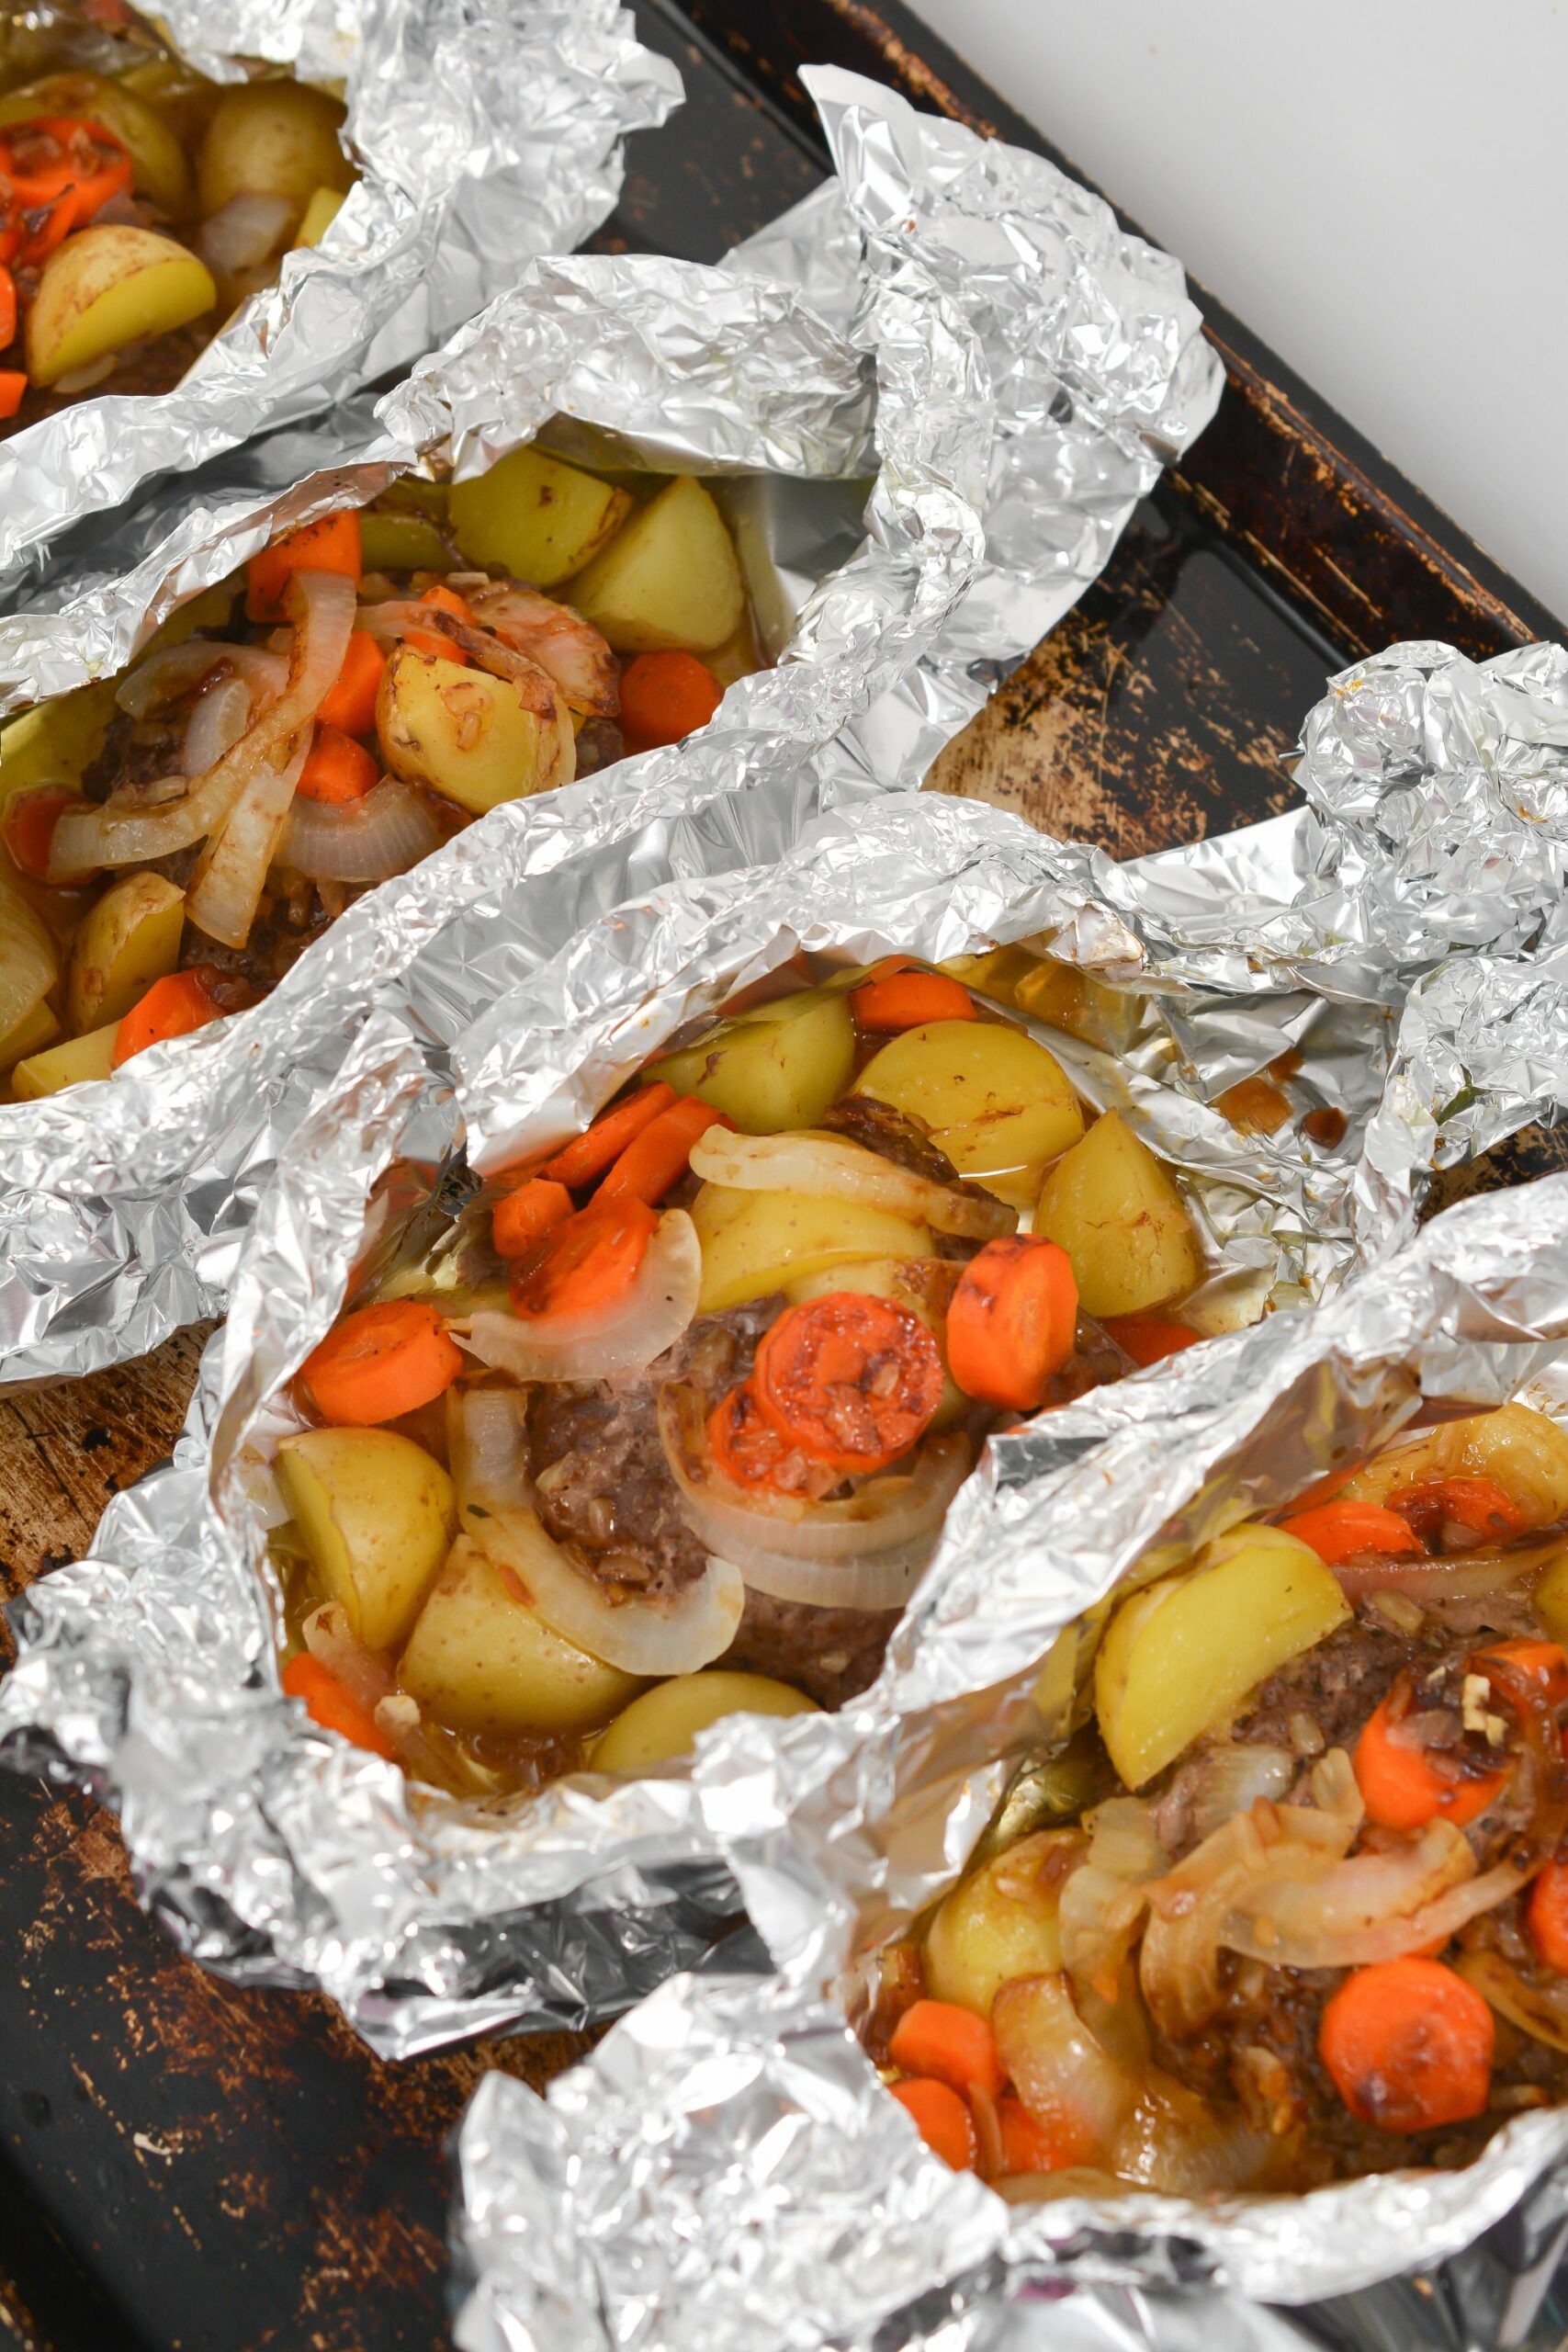 Several packets of the Beef and Vegetable Hobo Dinners.